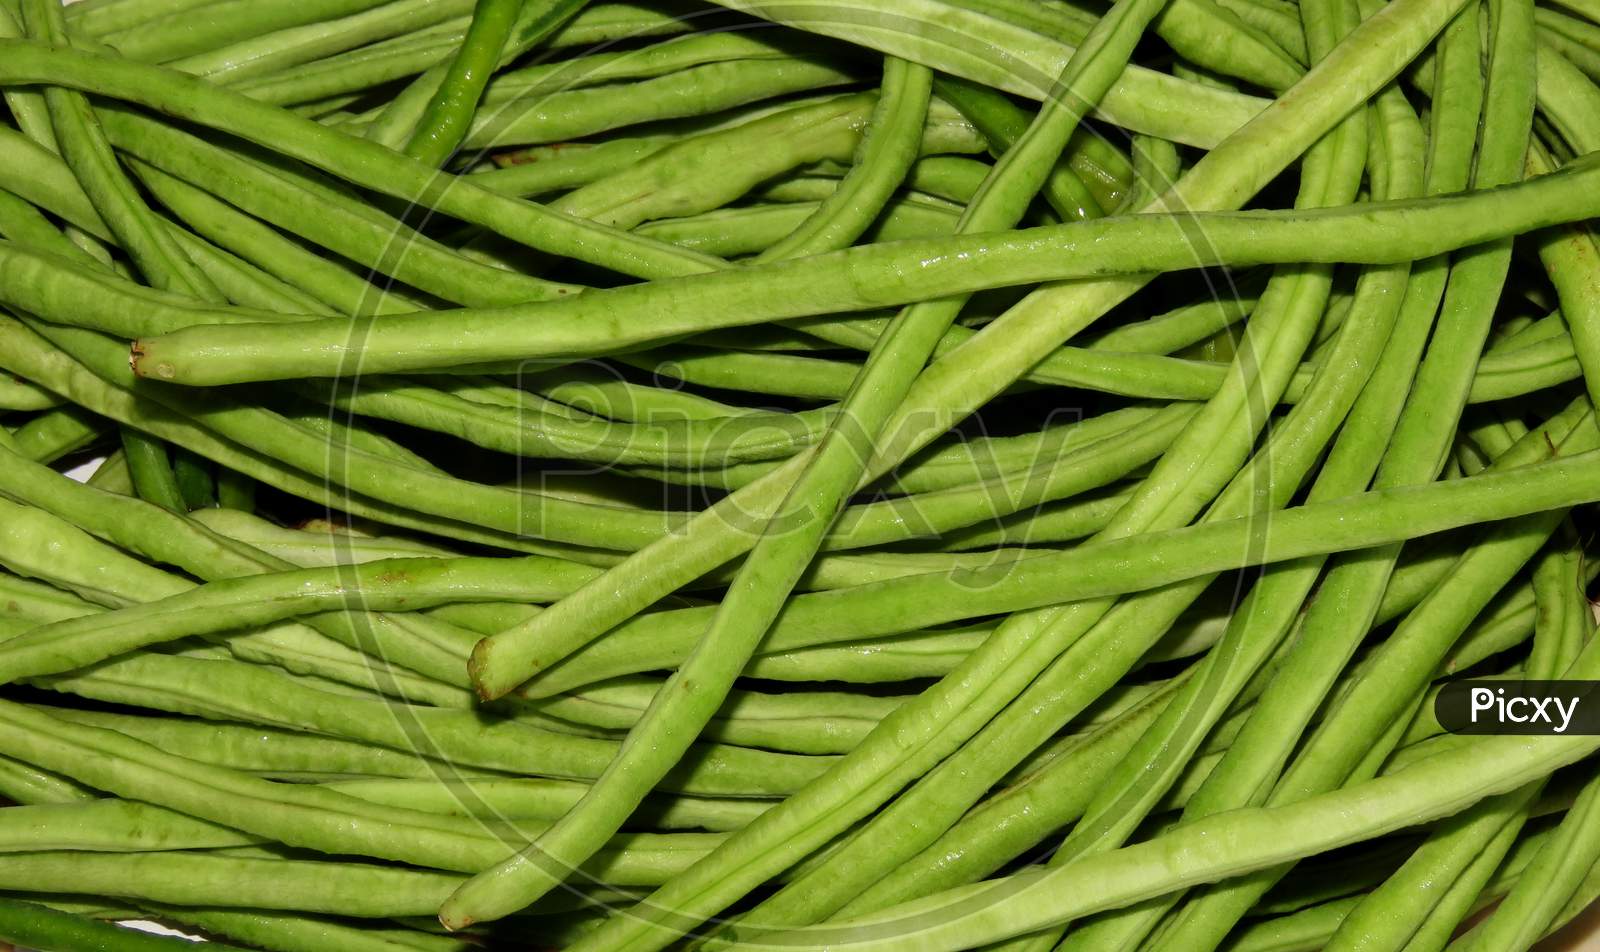 Yardlong beans,Green beans background,The asparagus bean is a legume cultivated for its edible green pods containing immature seeds, Isolated Yardlong beans